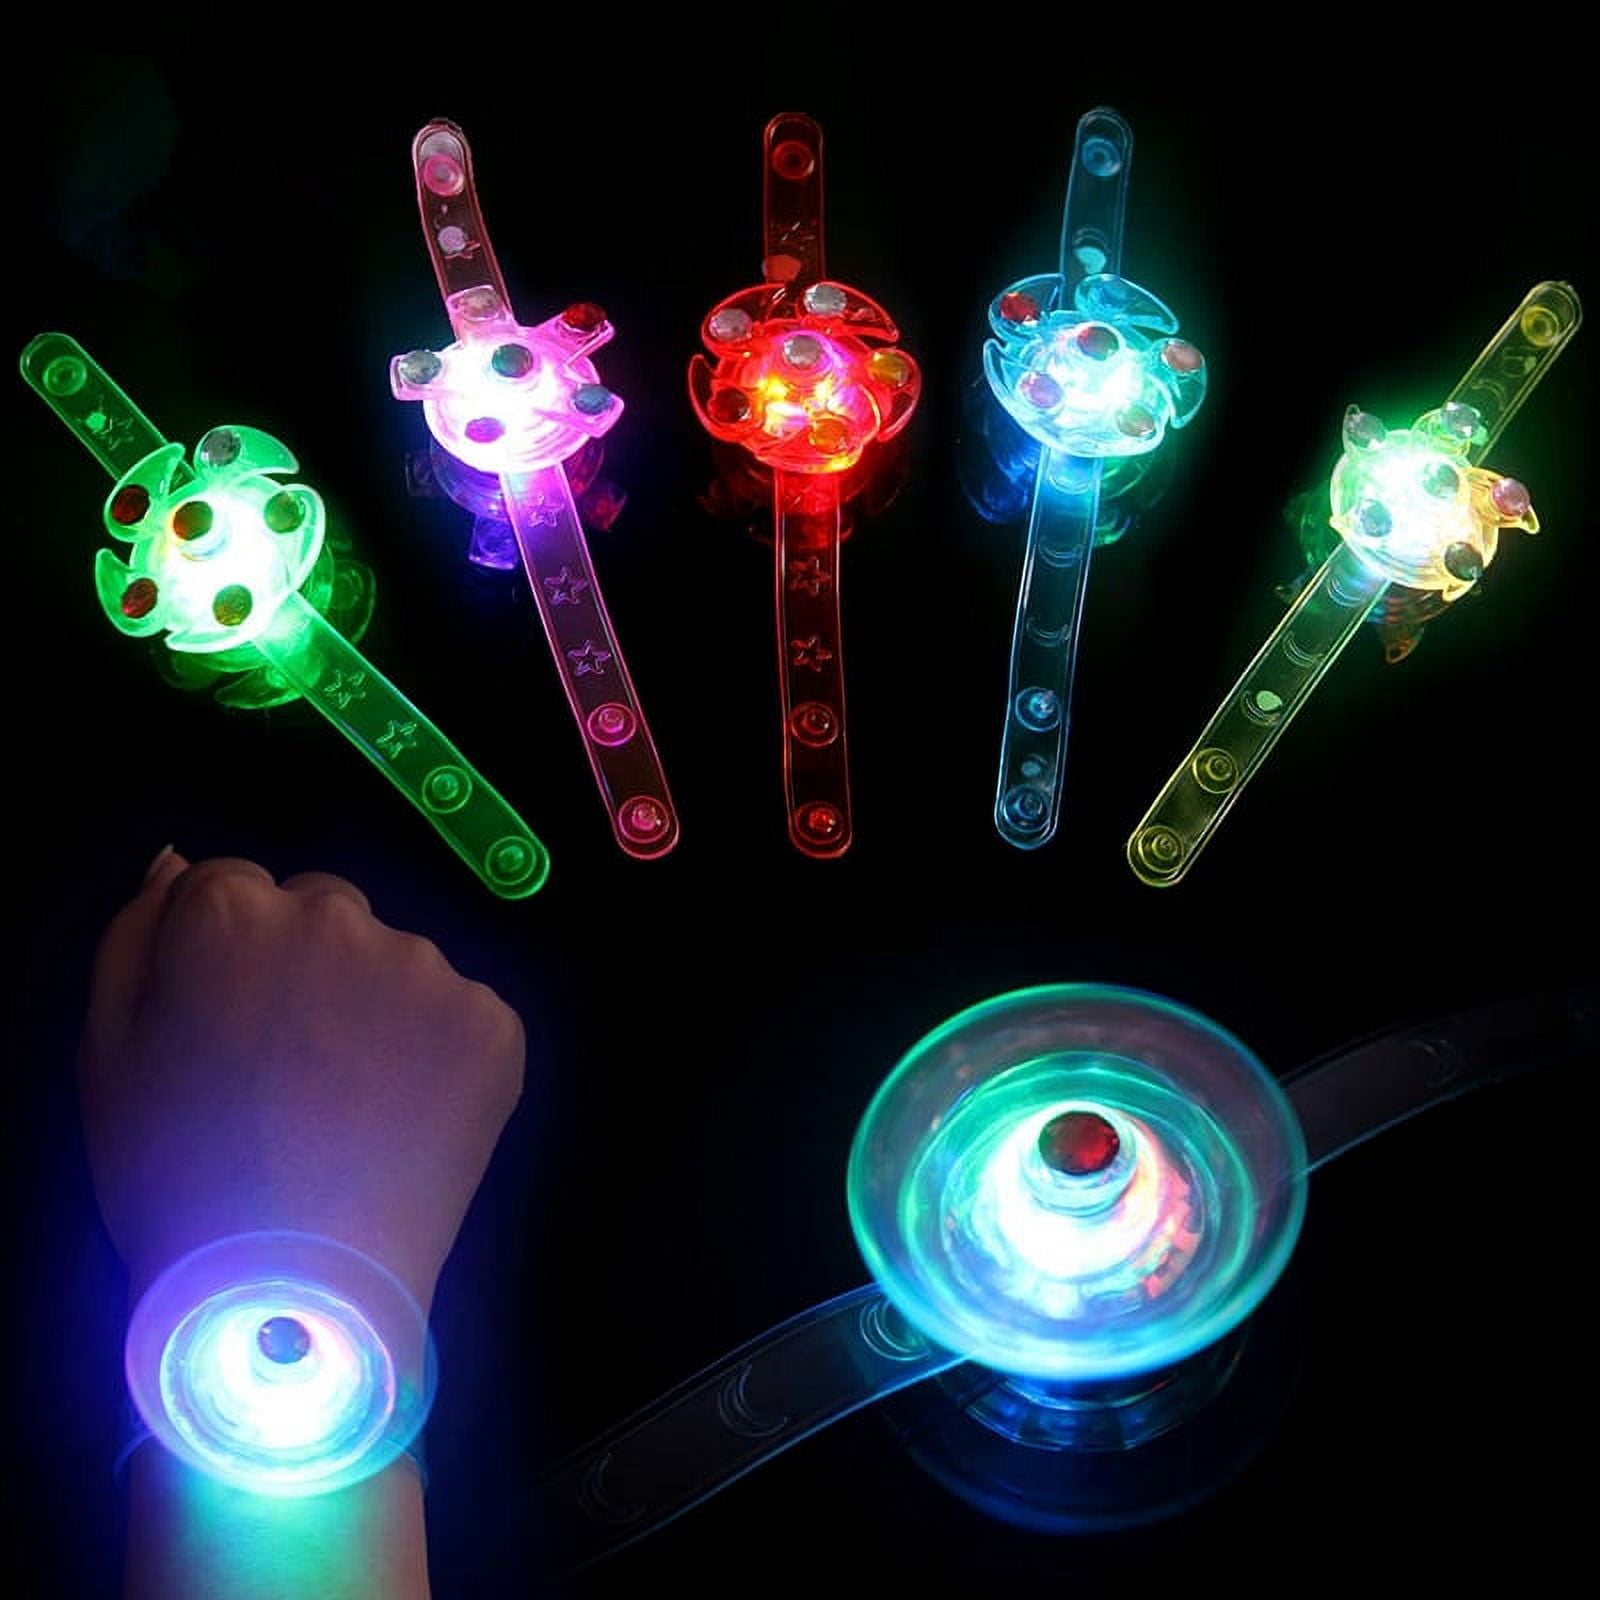 Hungdao 72 Packs Glow LED Bracelets 12 Neon Color Glow In The Dark Light up  Bracelet Party Supplies for Kids Adults Flashing LED Bracelet Toy for